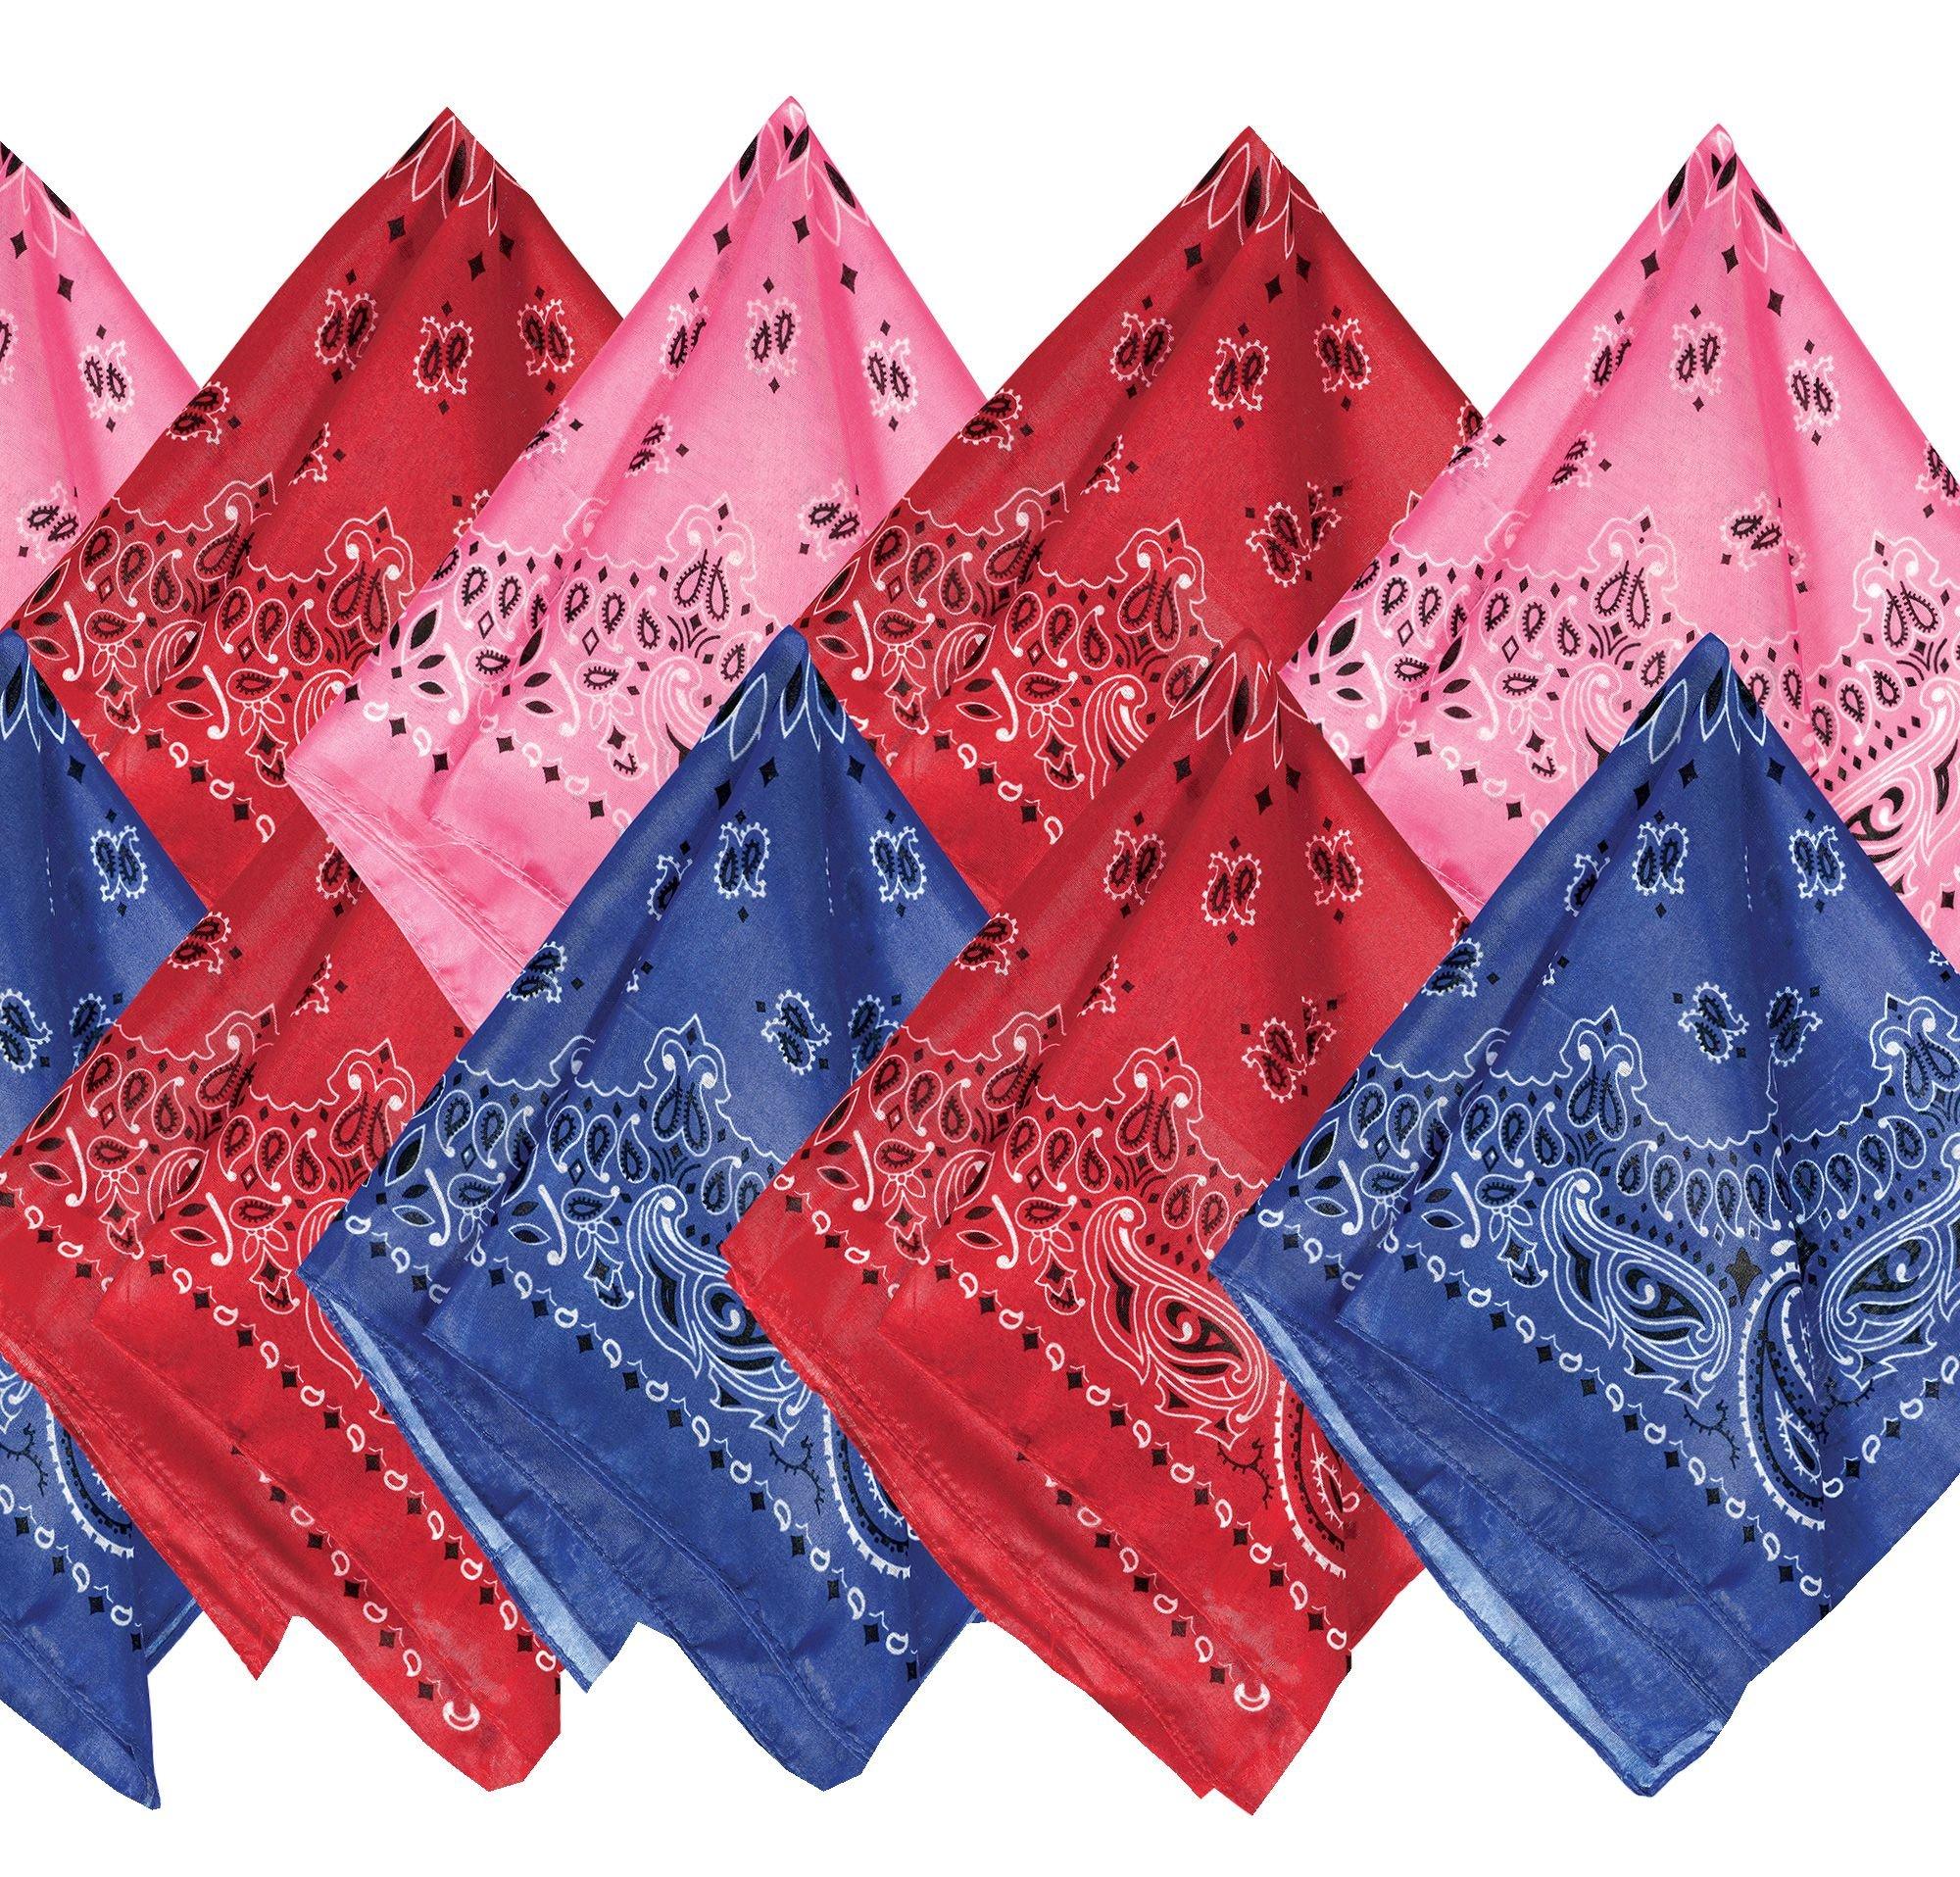 Reusable Bowl Covers from Bandanas for Summer BBQs